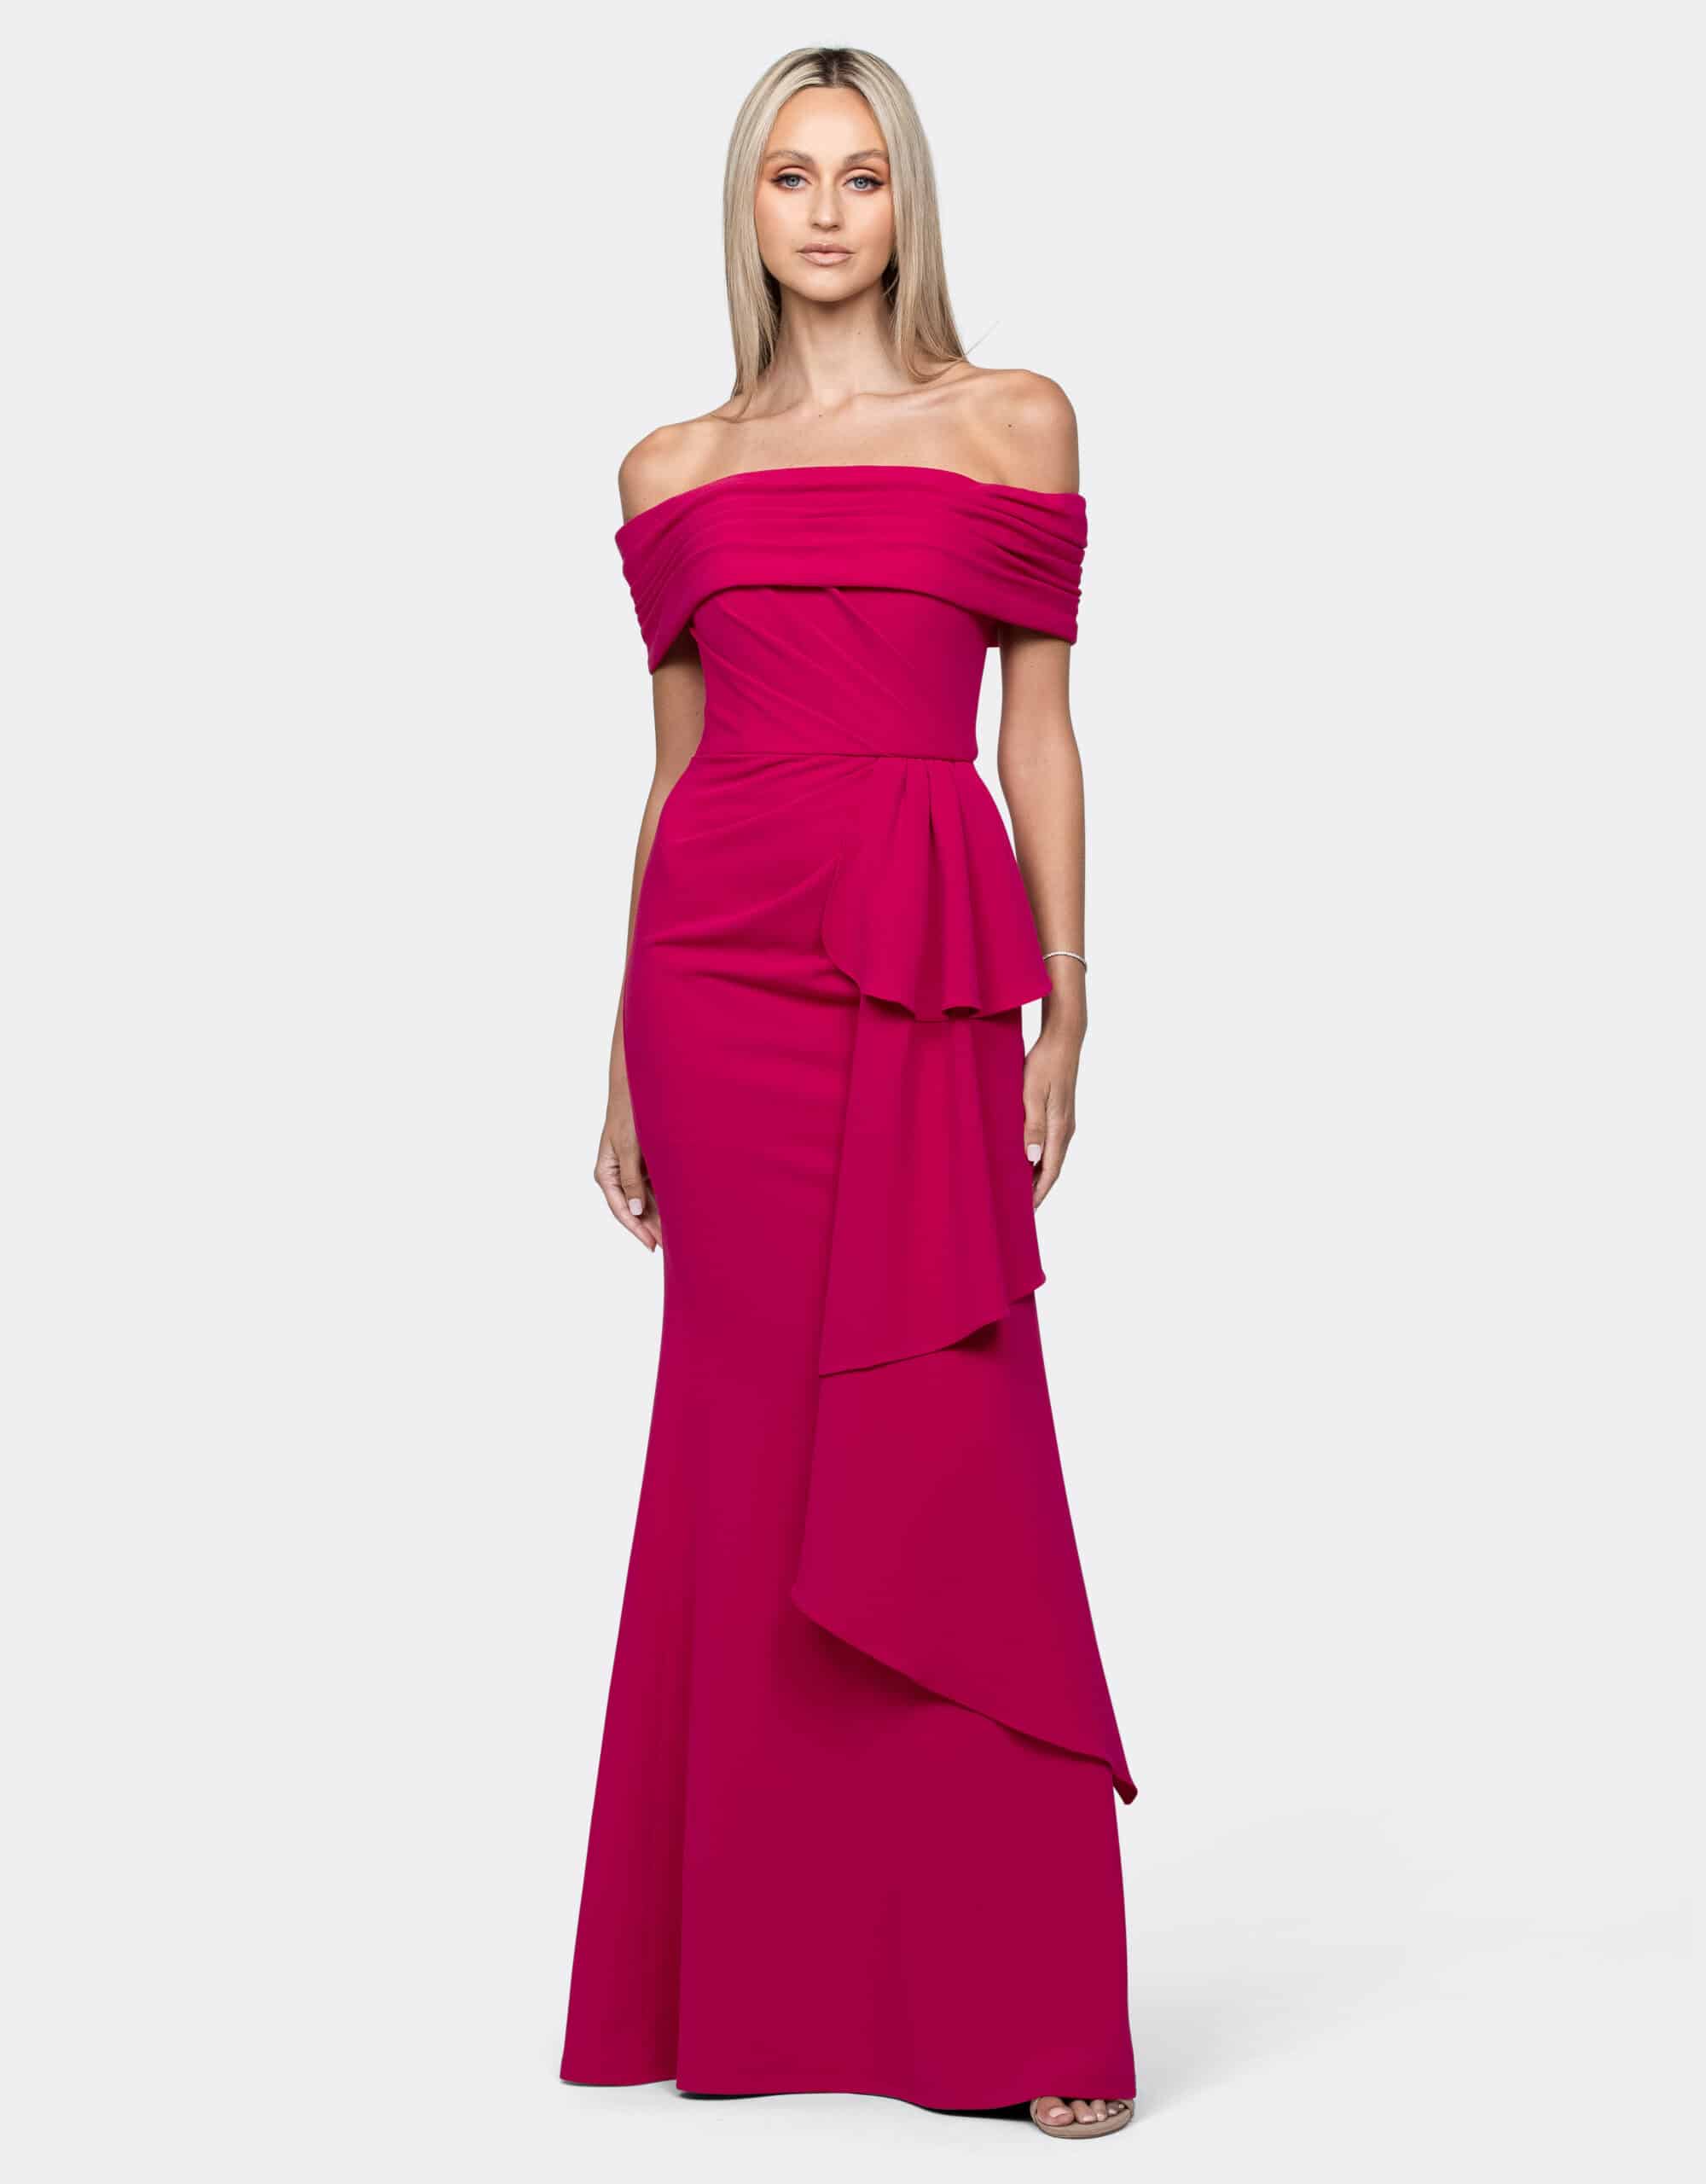 Off-Shoulder Fishtail Gown with Draped Overlay.JPG